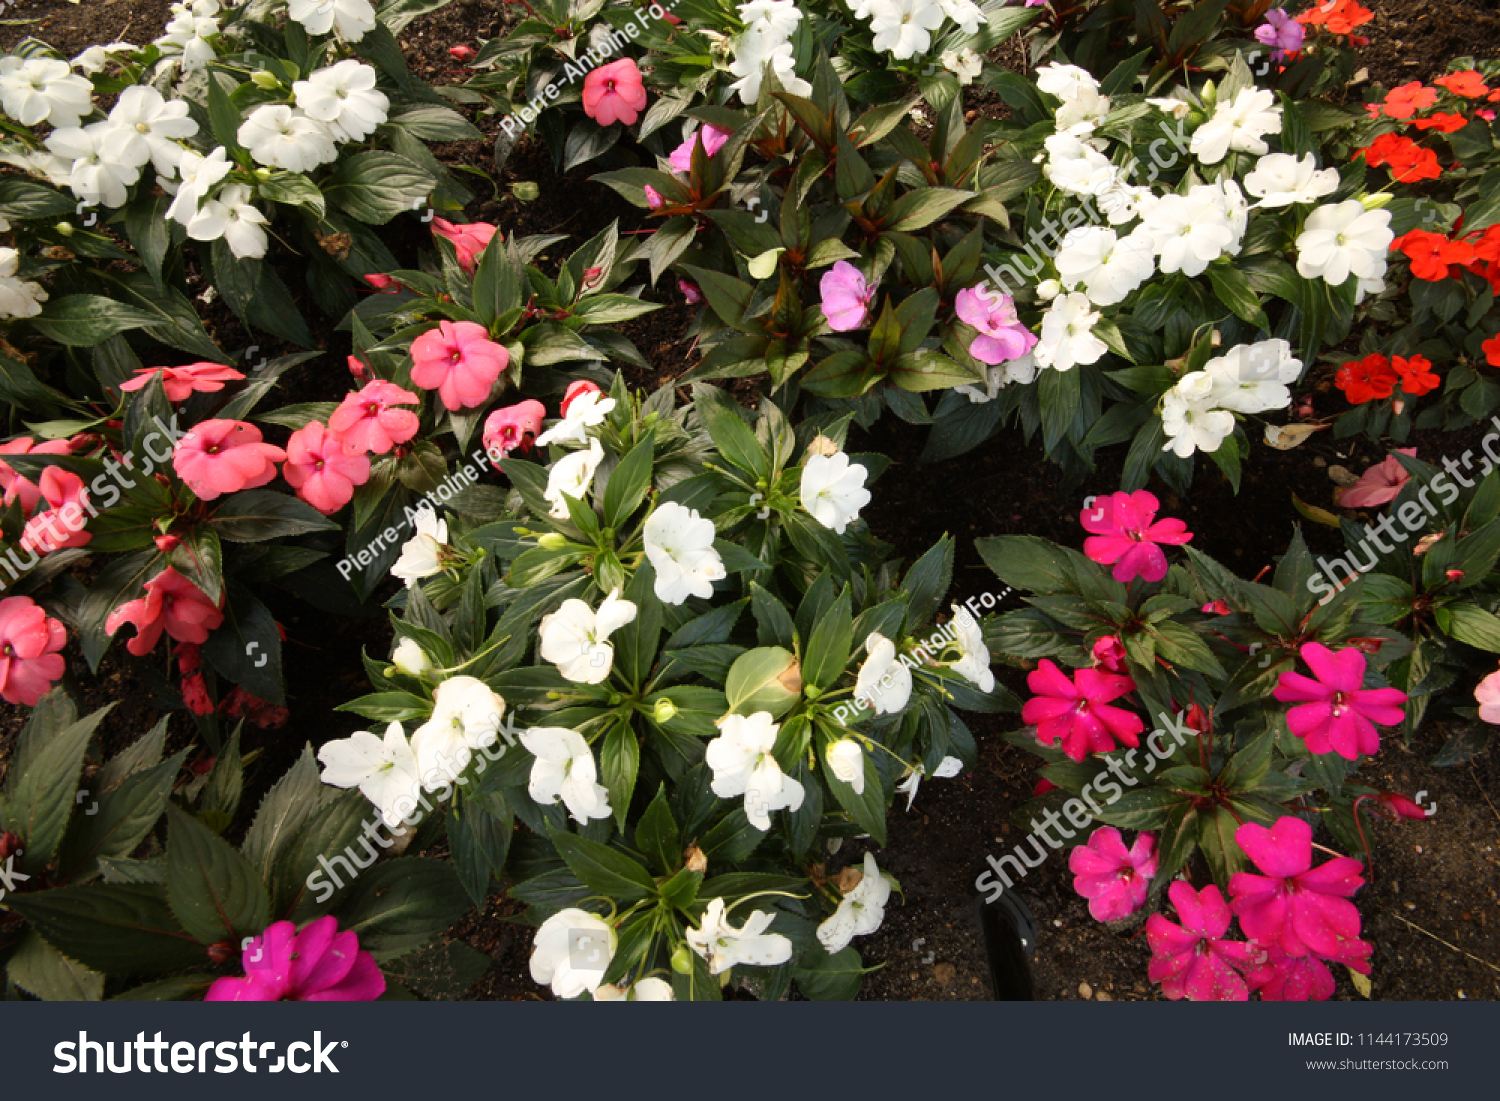 New Guinea Impatiens Flower Bed Nature Stock Image 1144173509